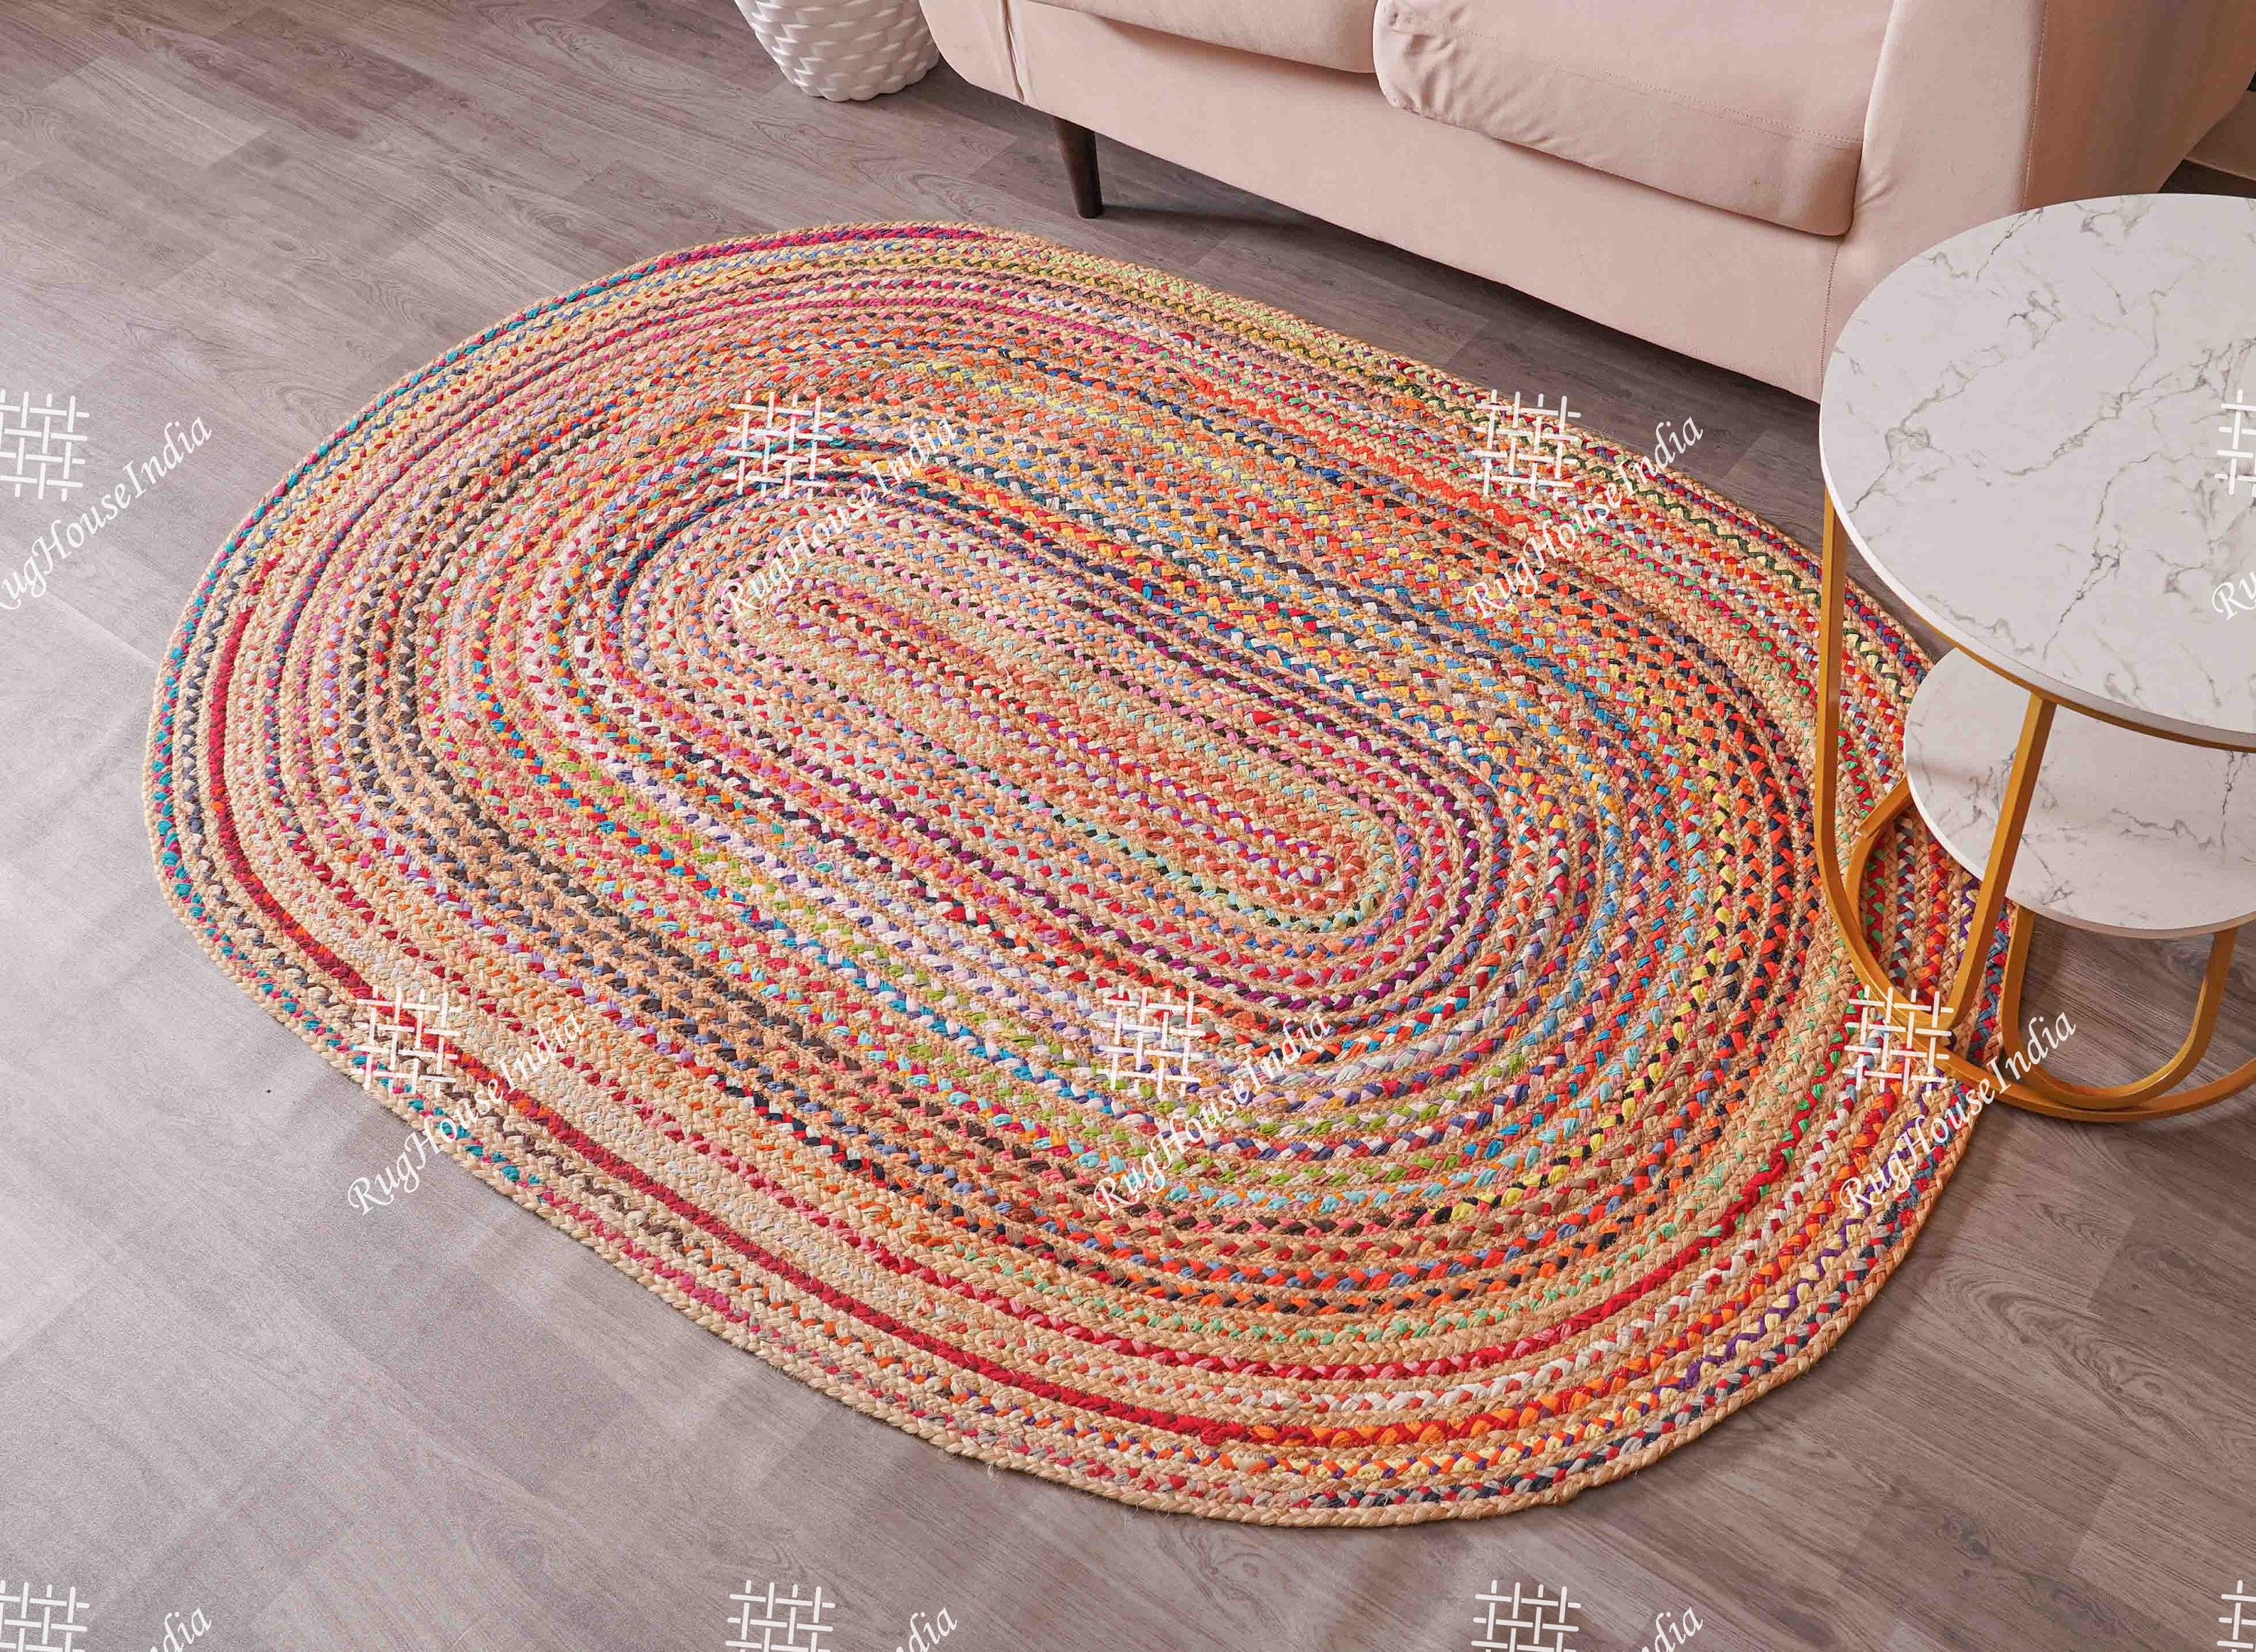  Chindi Rug Oval Rugs 4x6 Feet - Braided Rug Multi Color Rug No  Slip Rug - Reversible Natural Fiber Rugs Oval Area Rug Colorful Outdoor Rug  for Living Room Home Decor